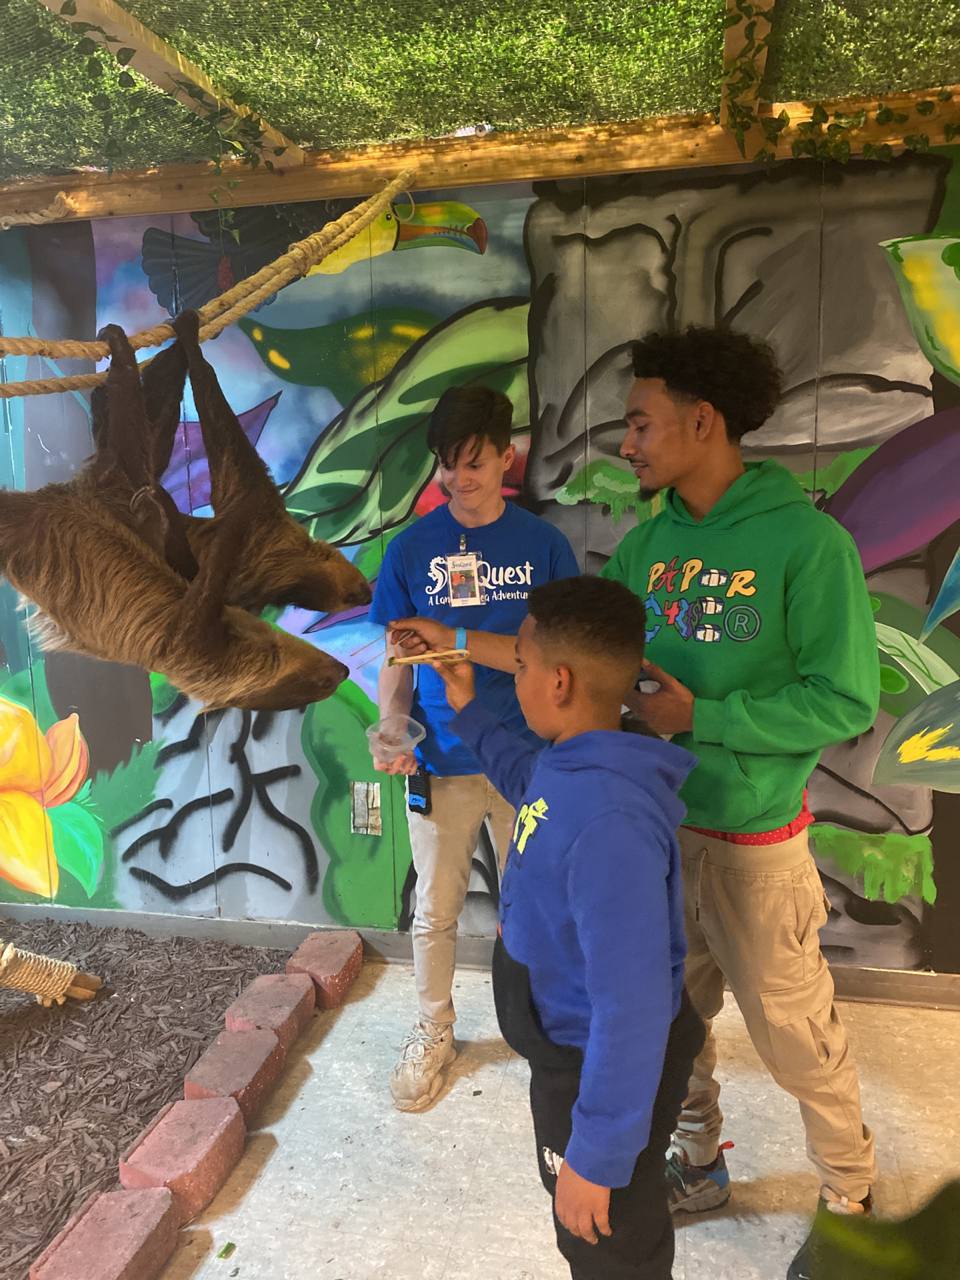 Kids feed a sloth at SeaQuest